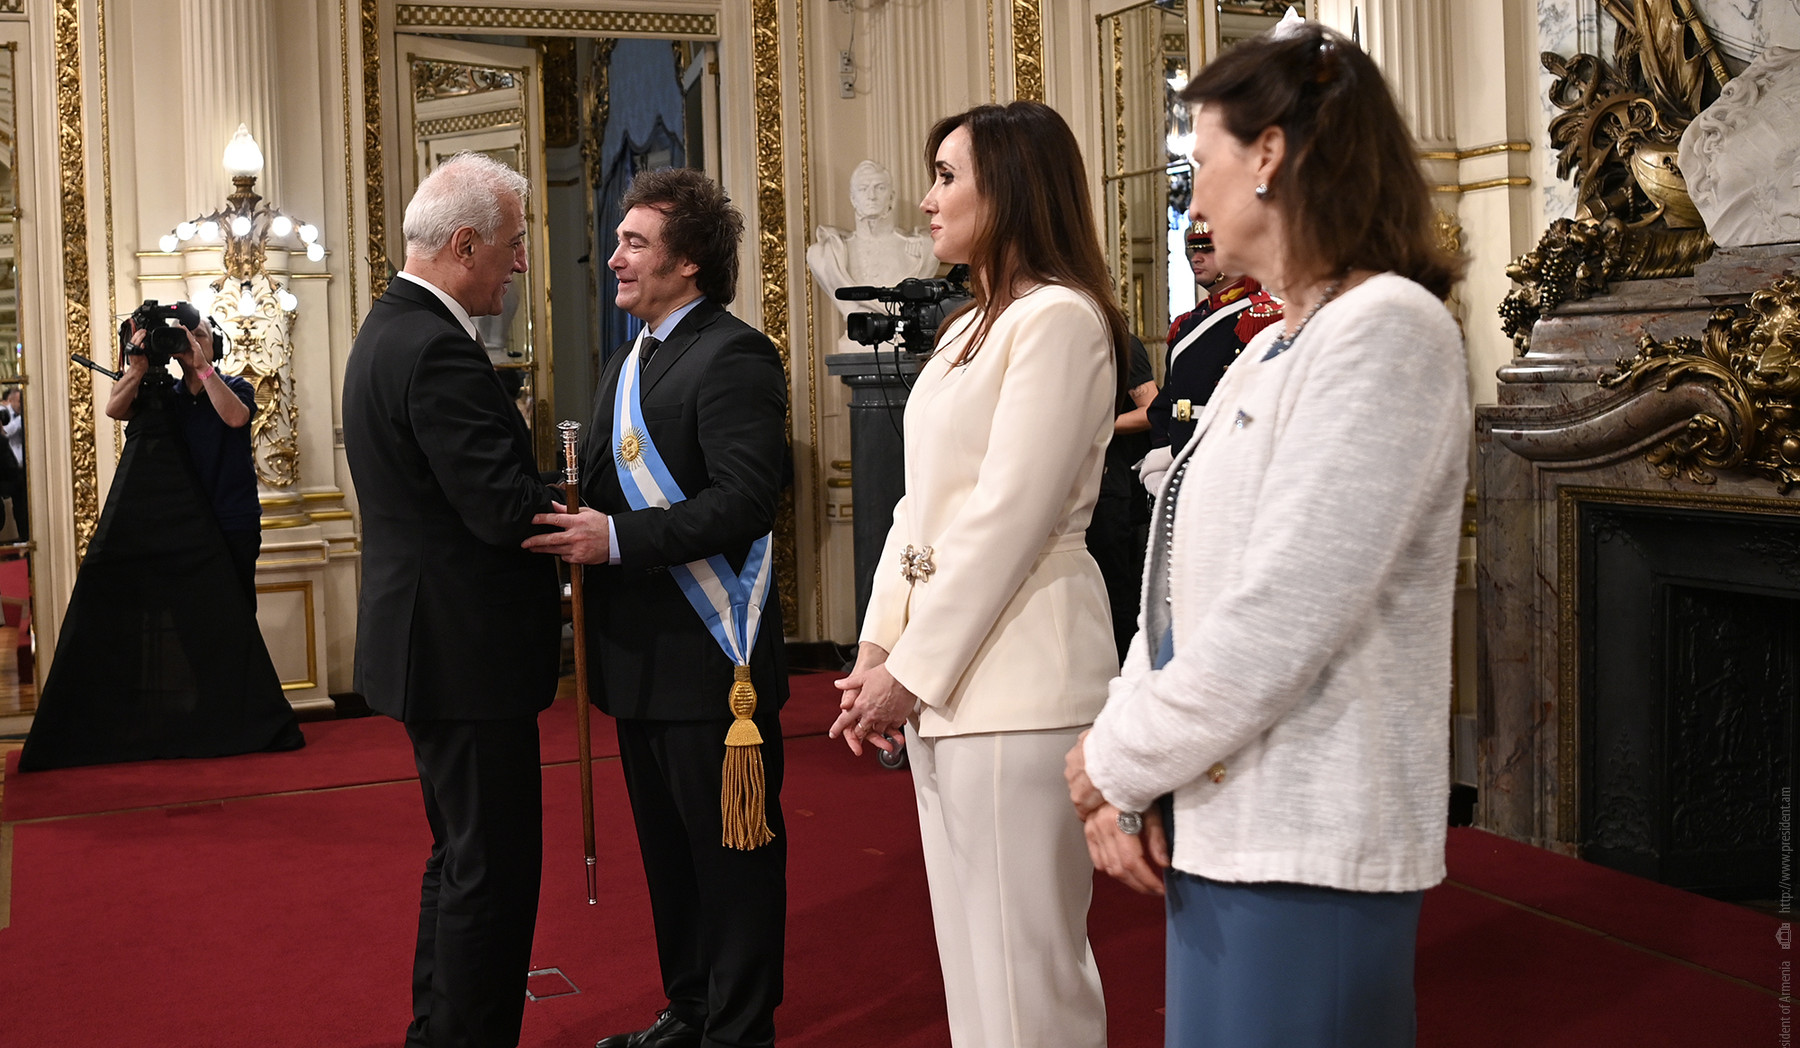 Vahagn Khachaturyan participated in inauguration ceremony of President of Argentina